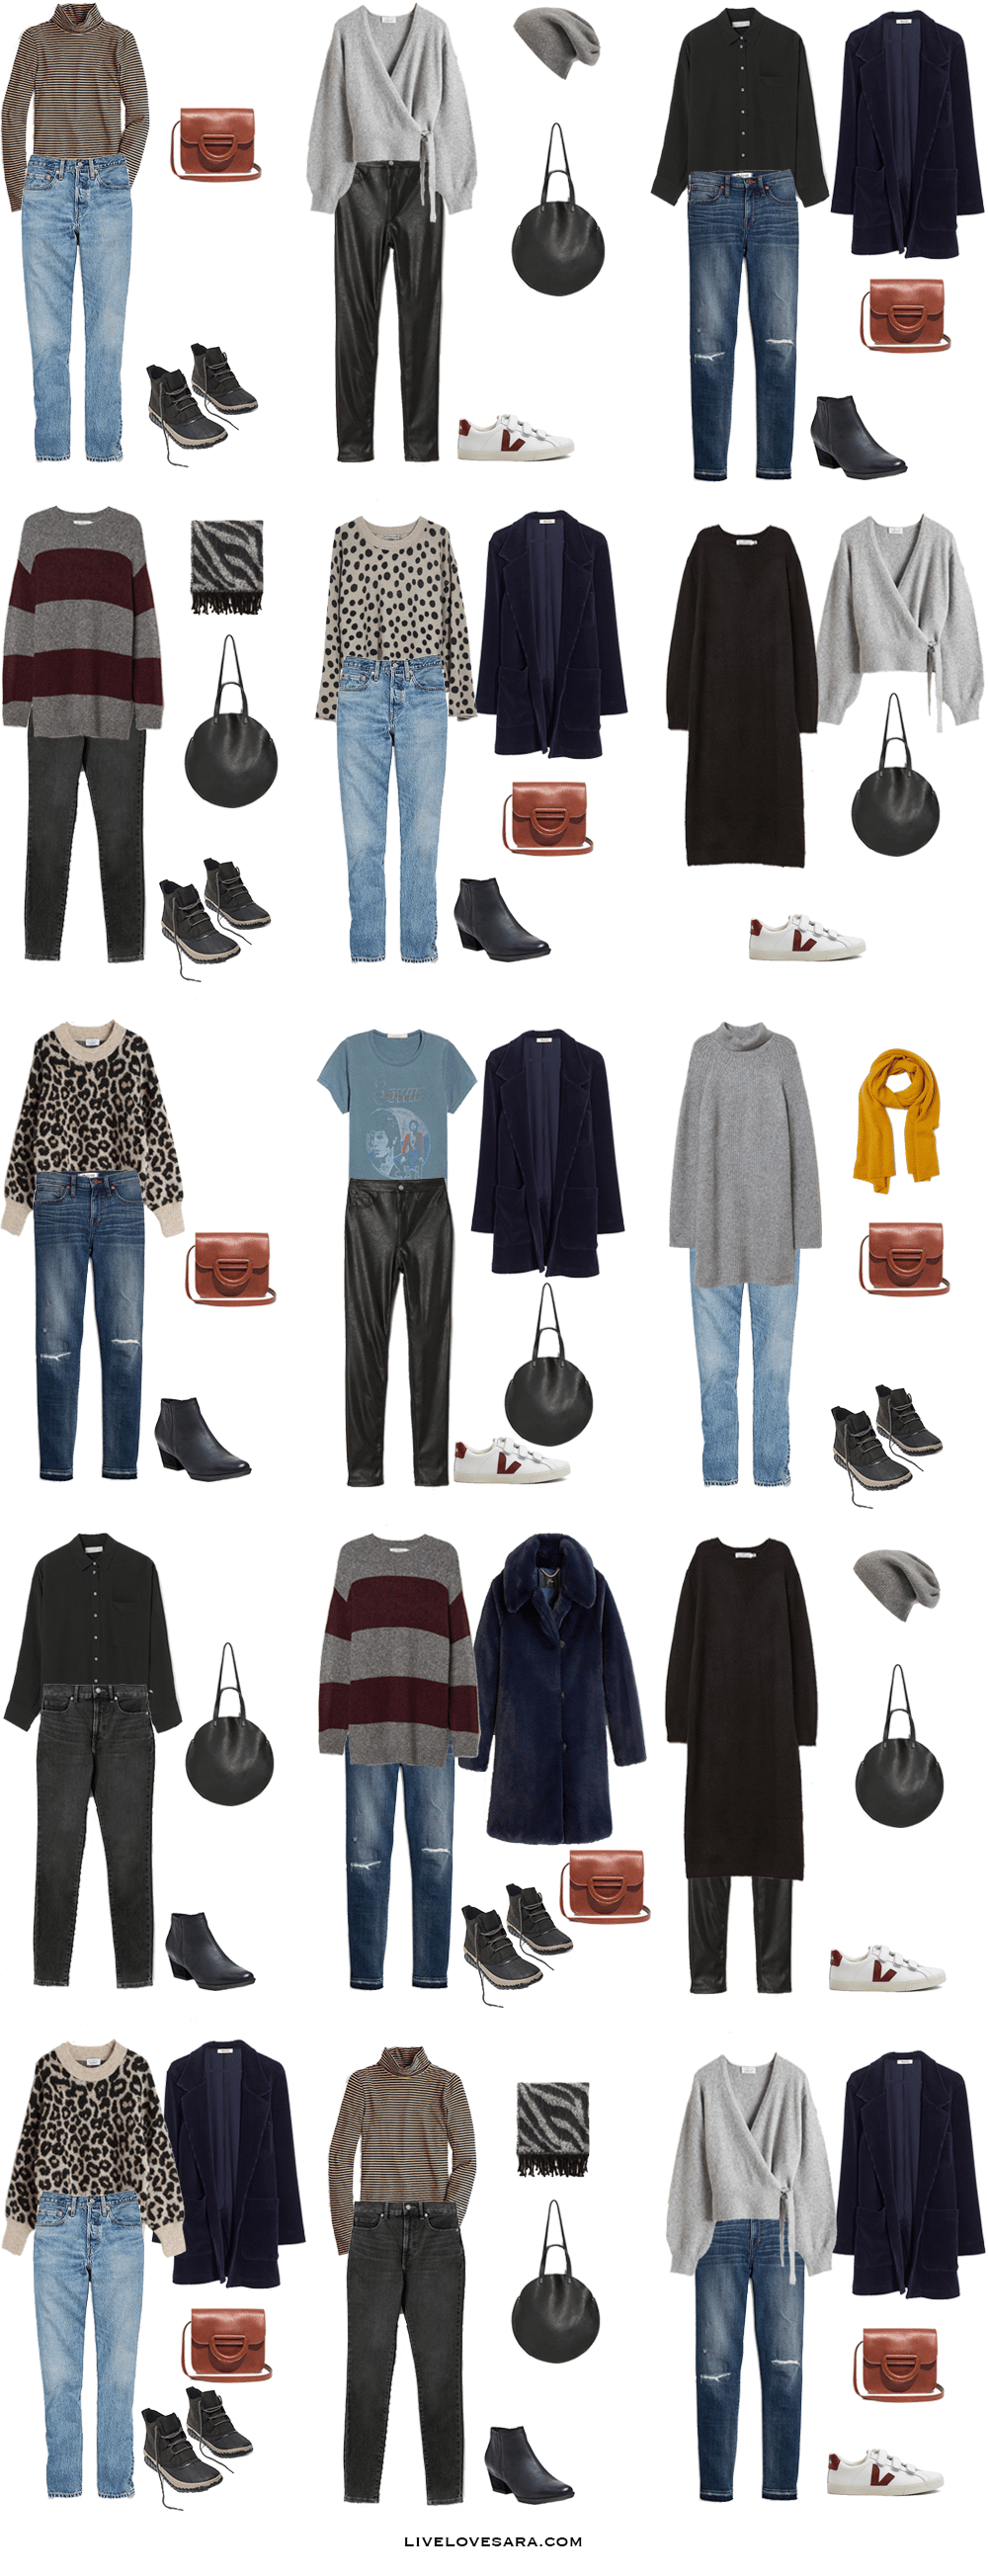 What to pack for a month in Europe packing list | Europe Outfit Ideas | What to Wear in Europe | Packing list for Europe | What to wear in winter | Travel Outfit Ideas | Winter Packing List | Europe Capsule Wardrobe | Packing Light | Capsule Wardrobe | travel wardrobe | Fall packing list | travel capsule |